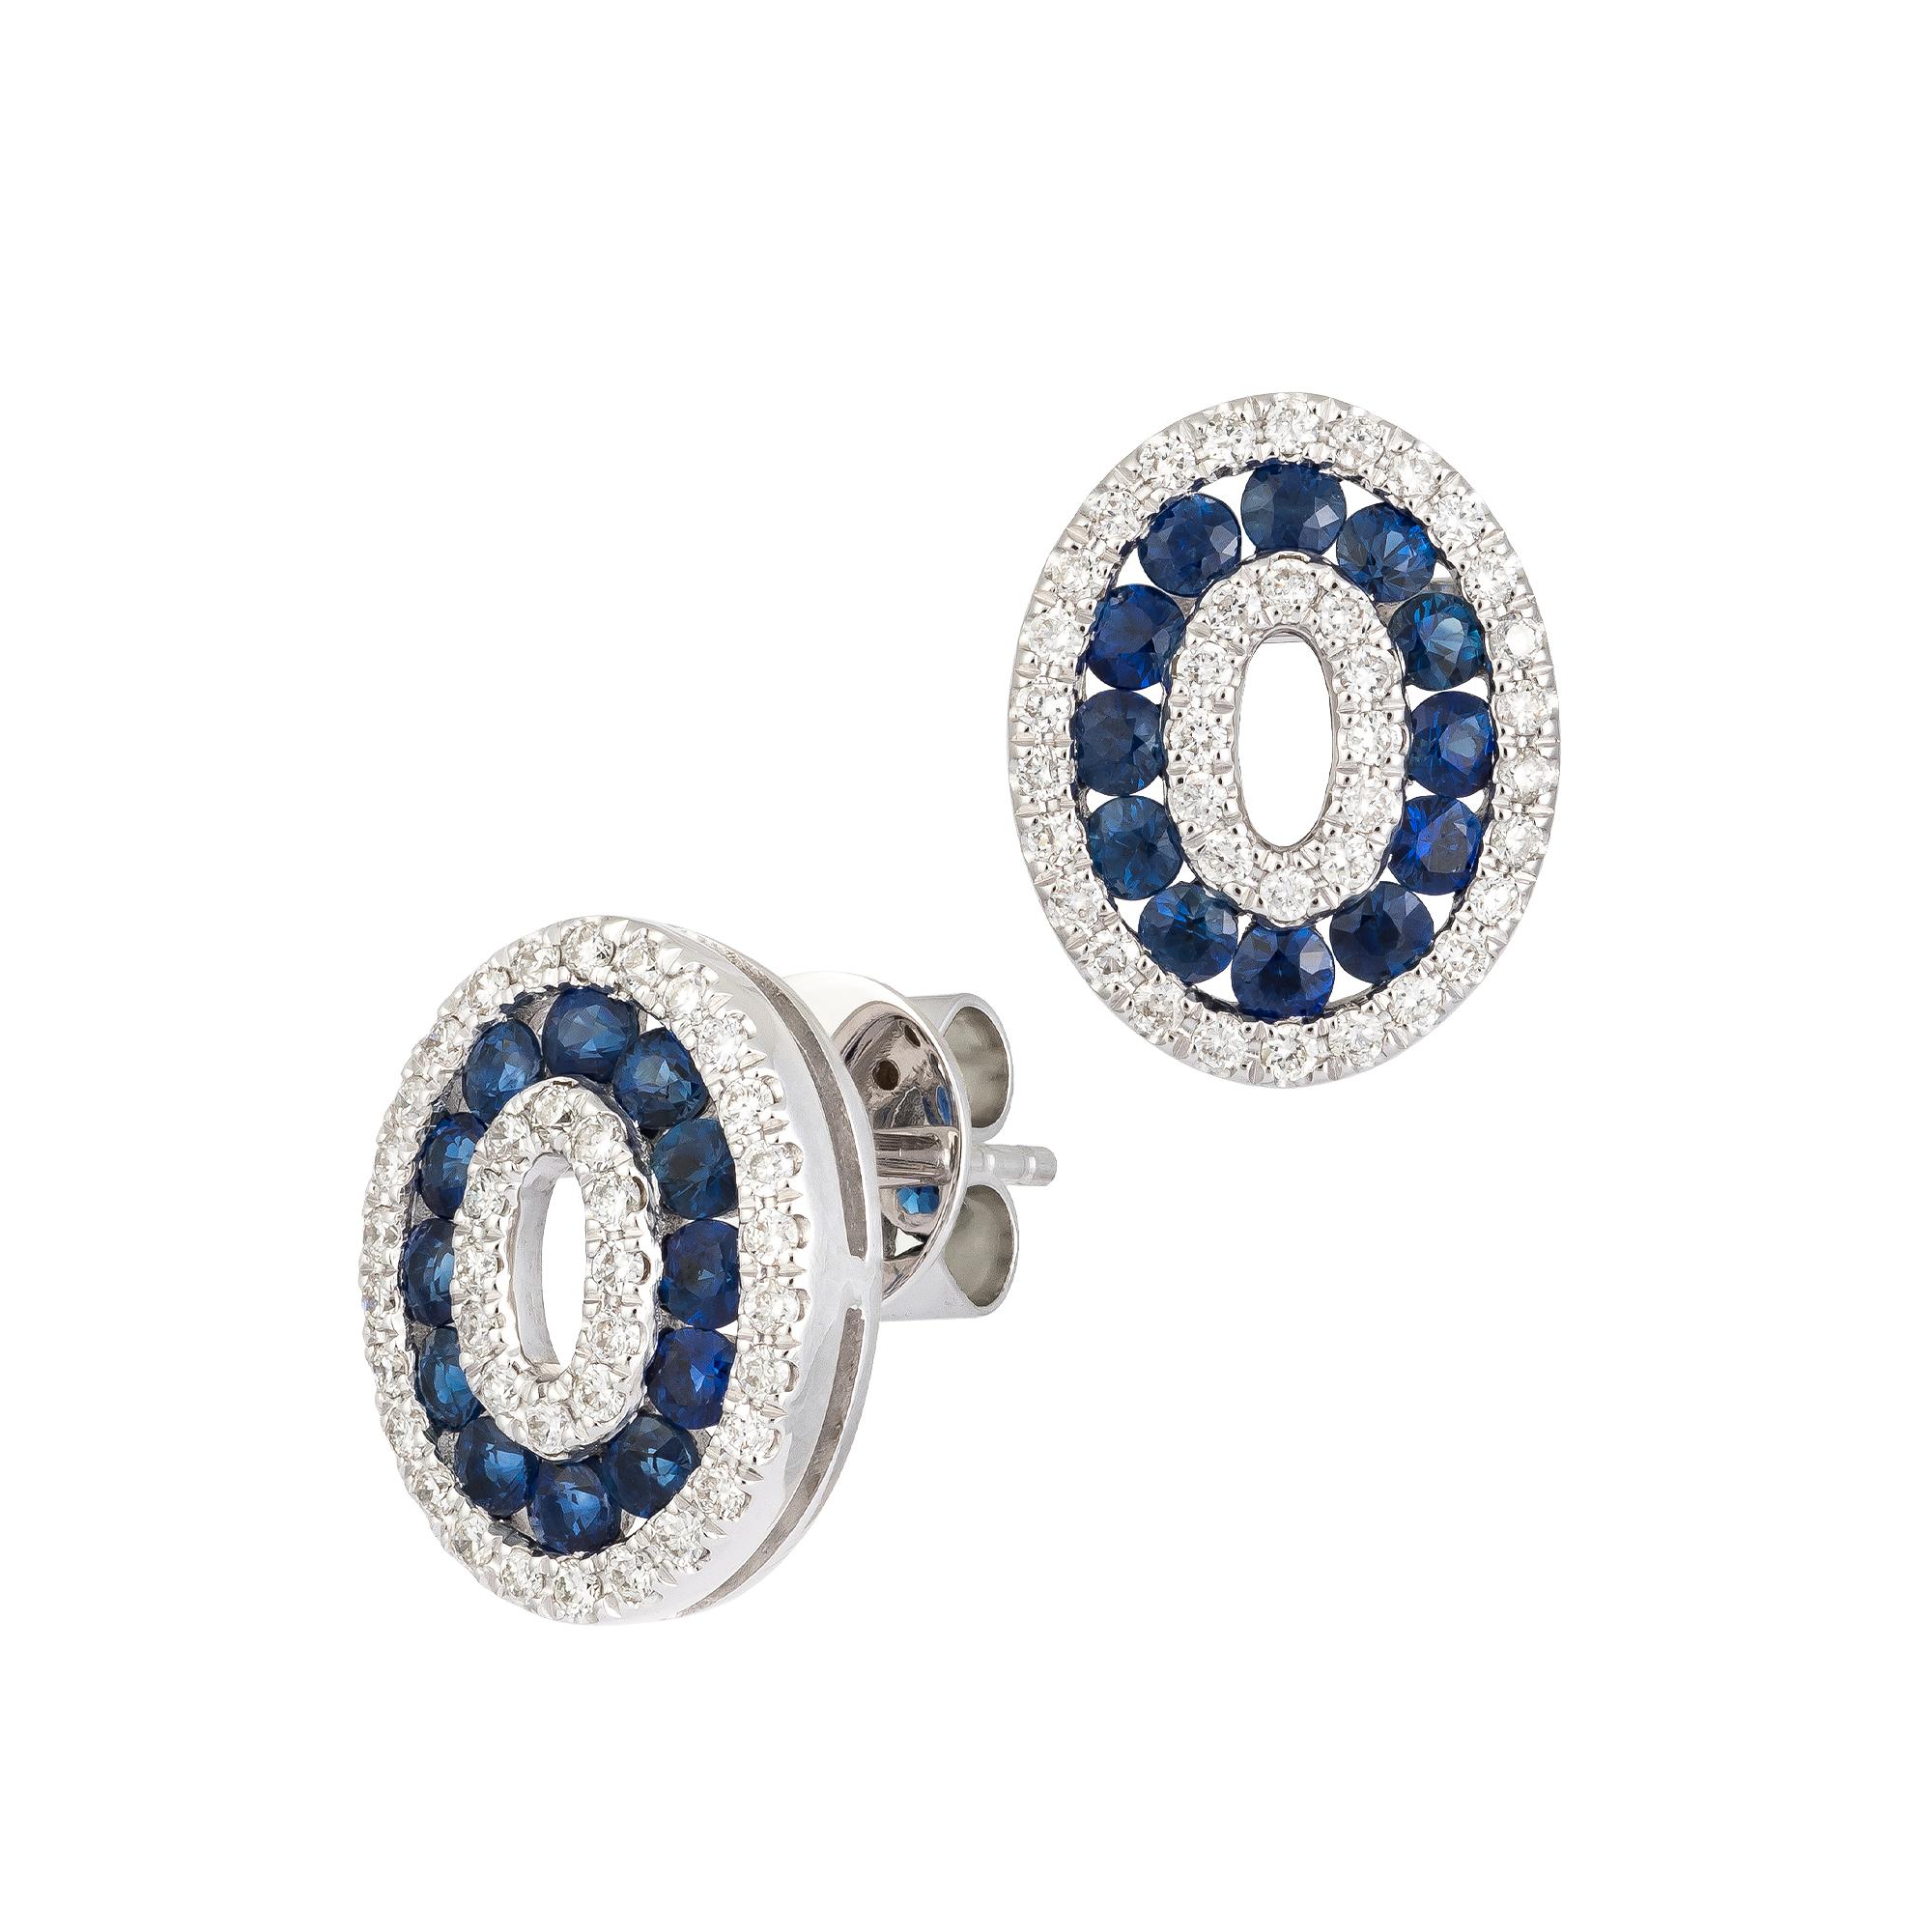 EARRING 18K Rose Gold Blue Sapphire 0.85 Cts/24 Pieces, D 0.46 Cts/76 Pieces
